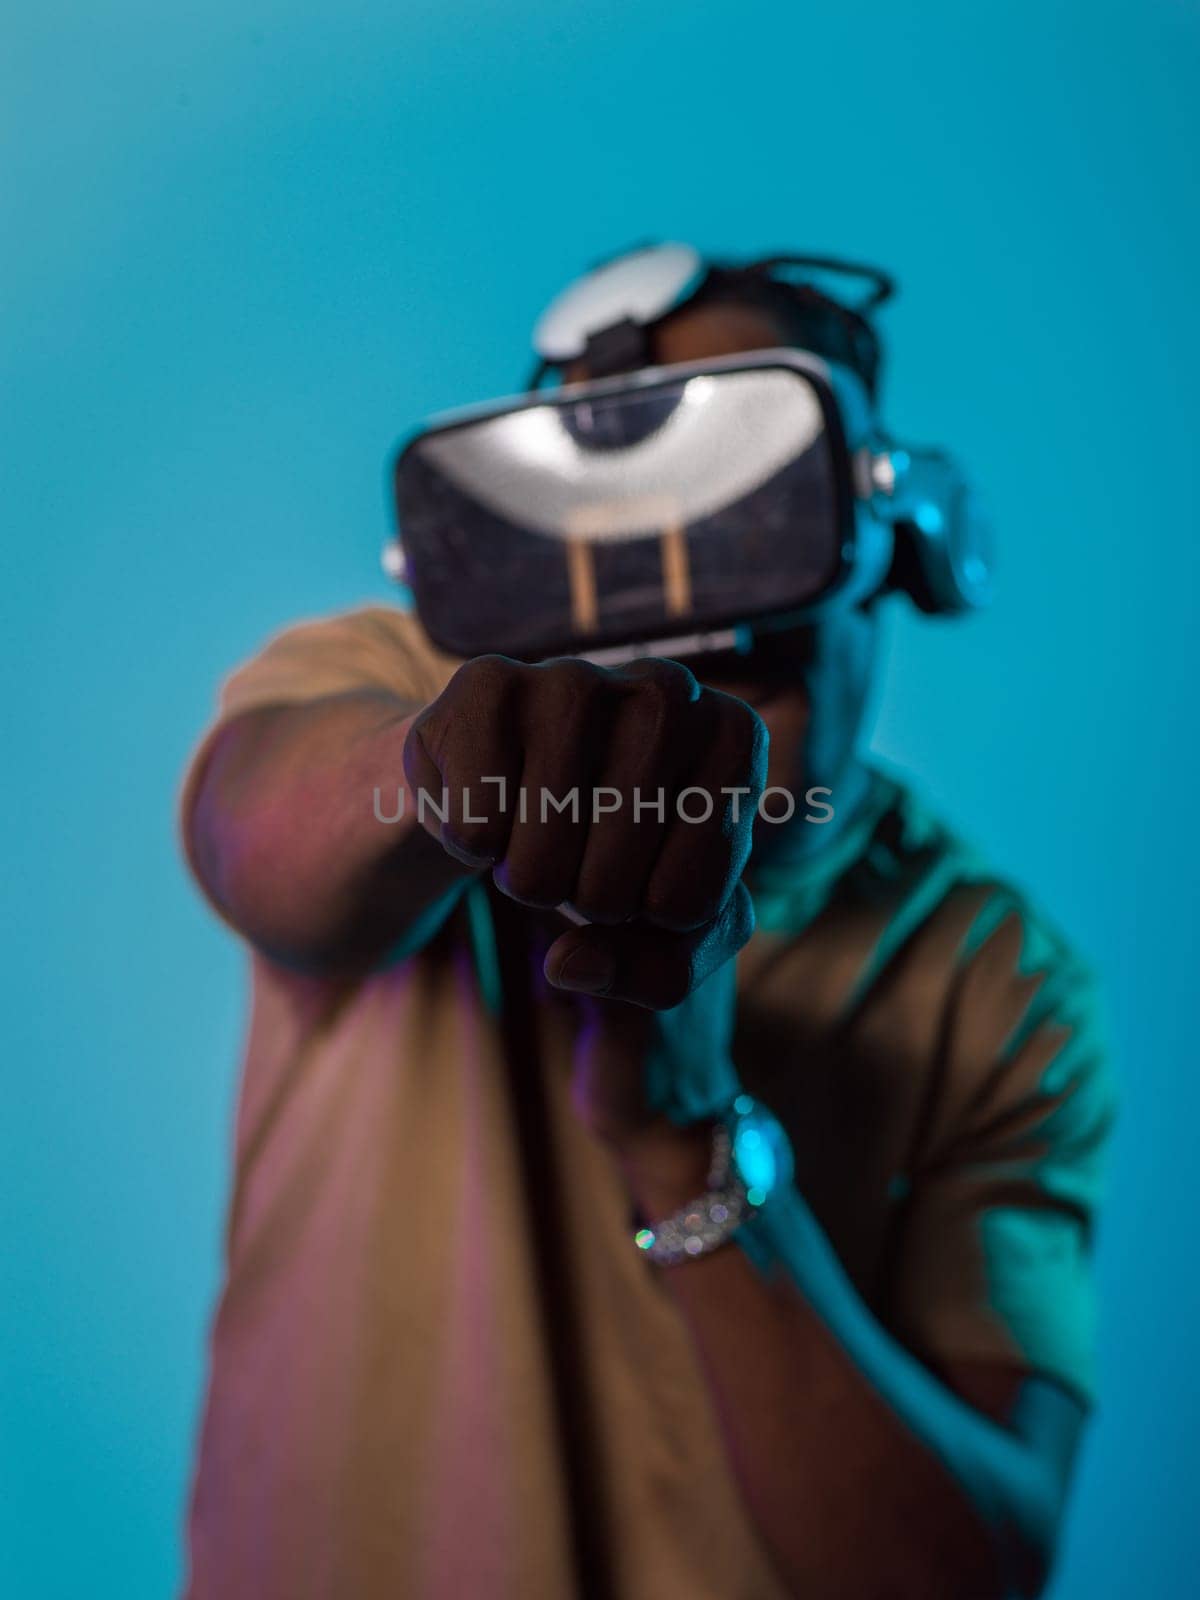 In an avant-garde scene, an African American man engages in cutting-edge virtual reality gaming, utilizing VR glasses to immerse himself in futuristic boxing games, set against a vivid blue background, showcasing the seamless fusion of technology, innovation, and interactive entertainment by dotshock